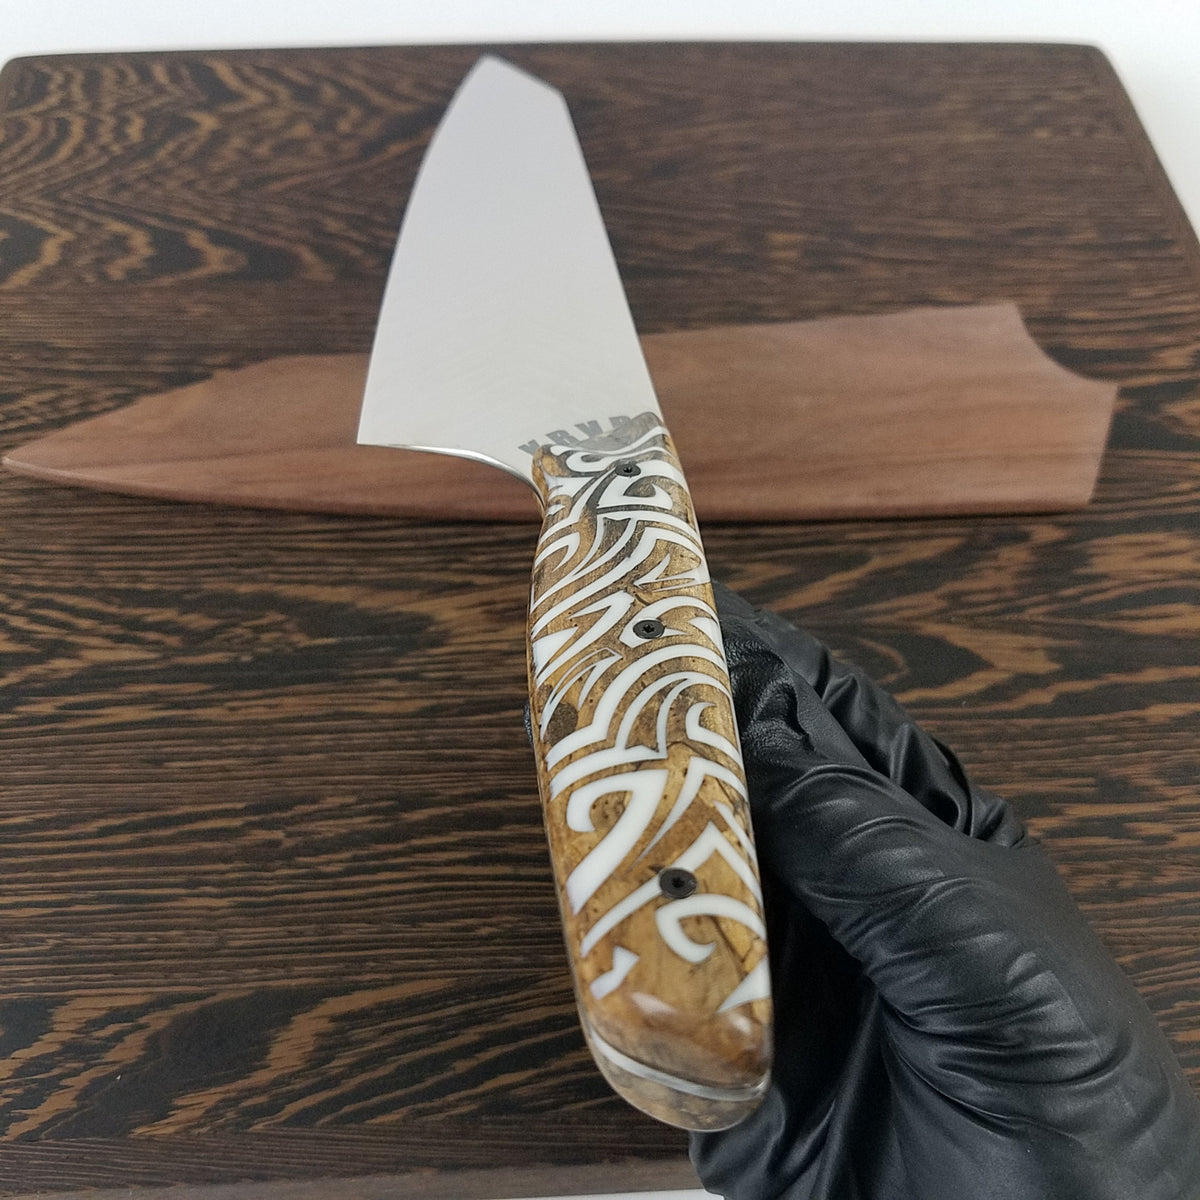 Prometheus - 10in (254mm) Damascus Gyuto - Feather - Smooth Handle